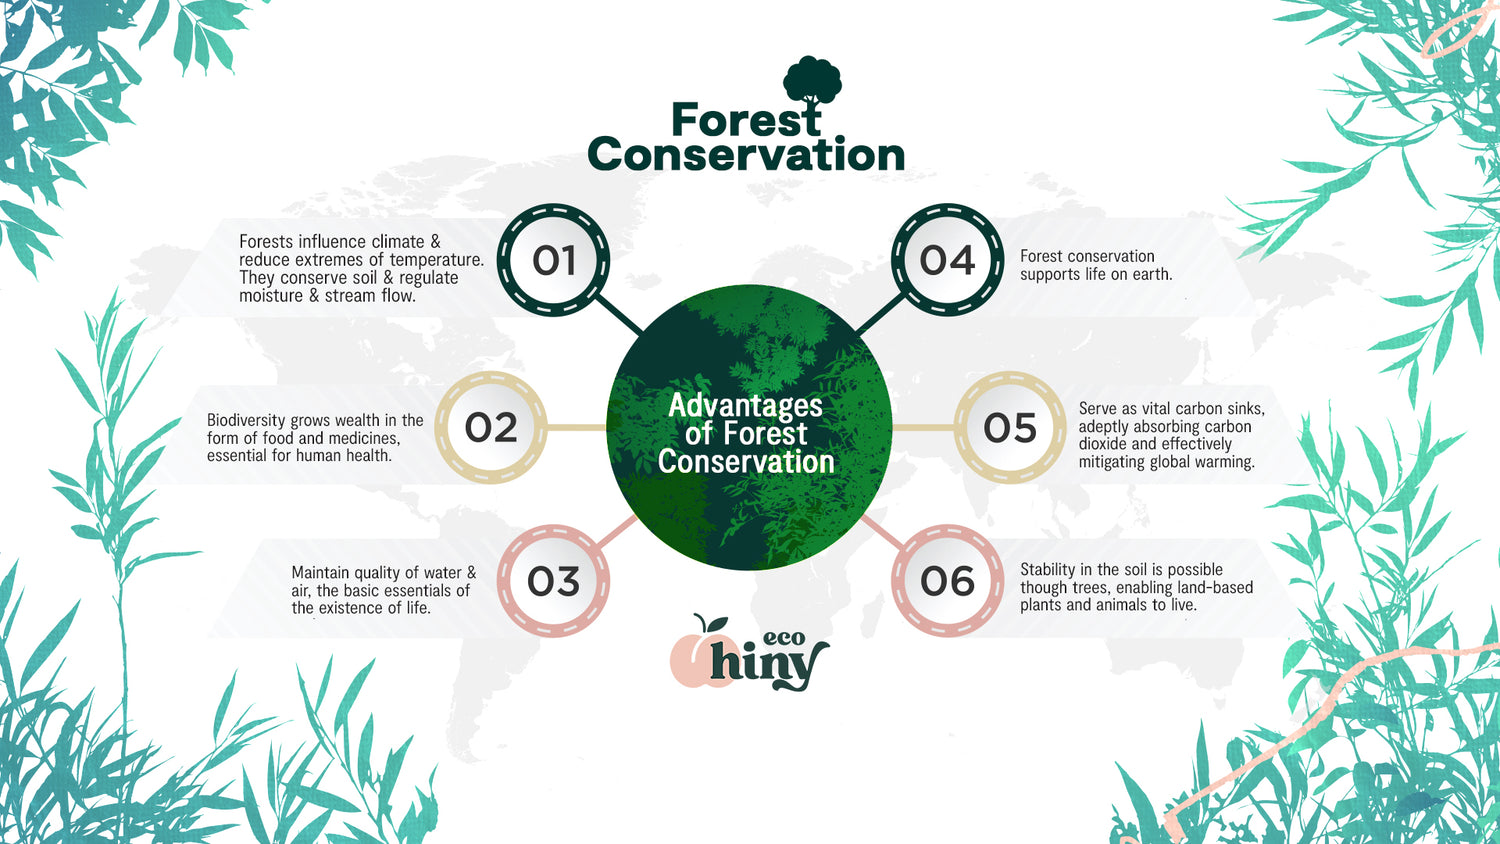 Forest Conservation: The vital role forests play on our planet